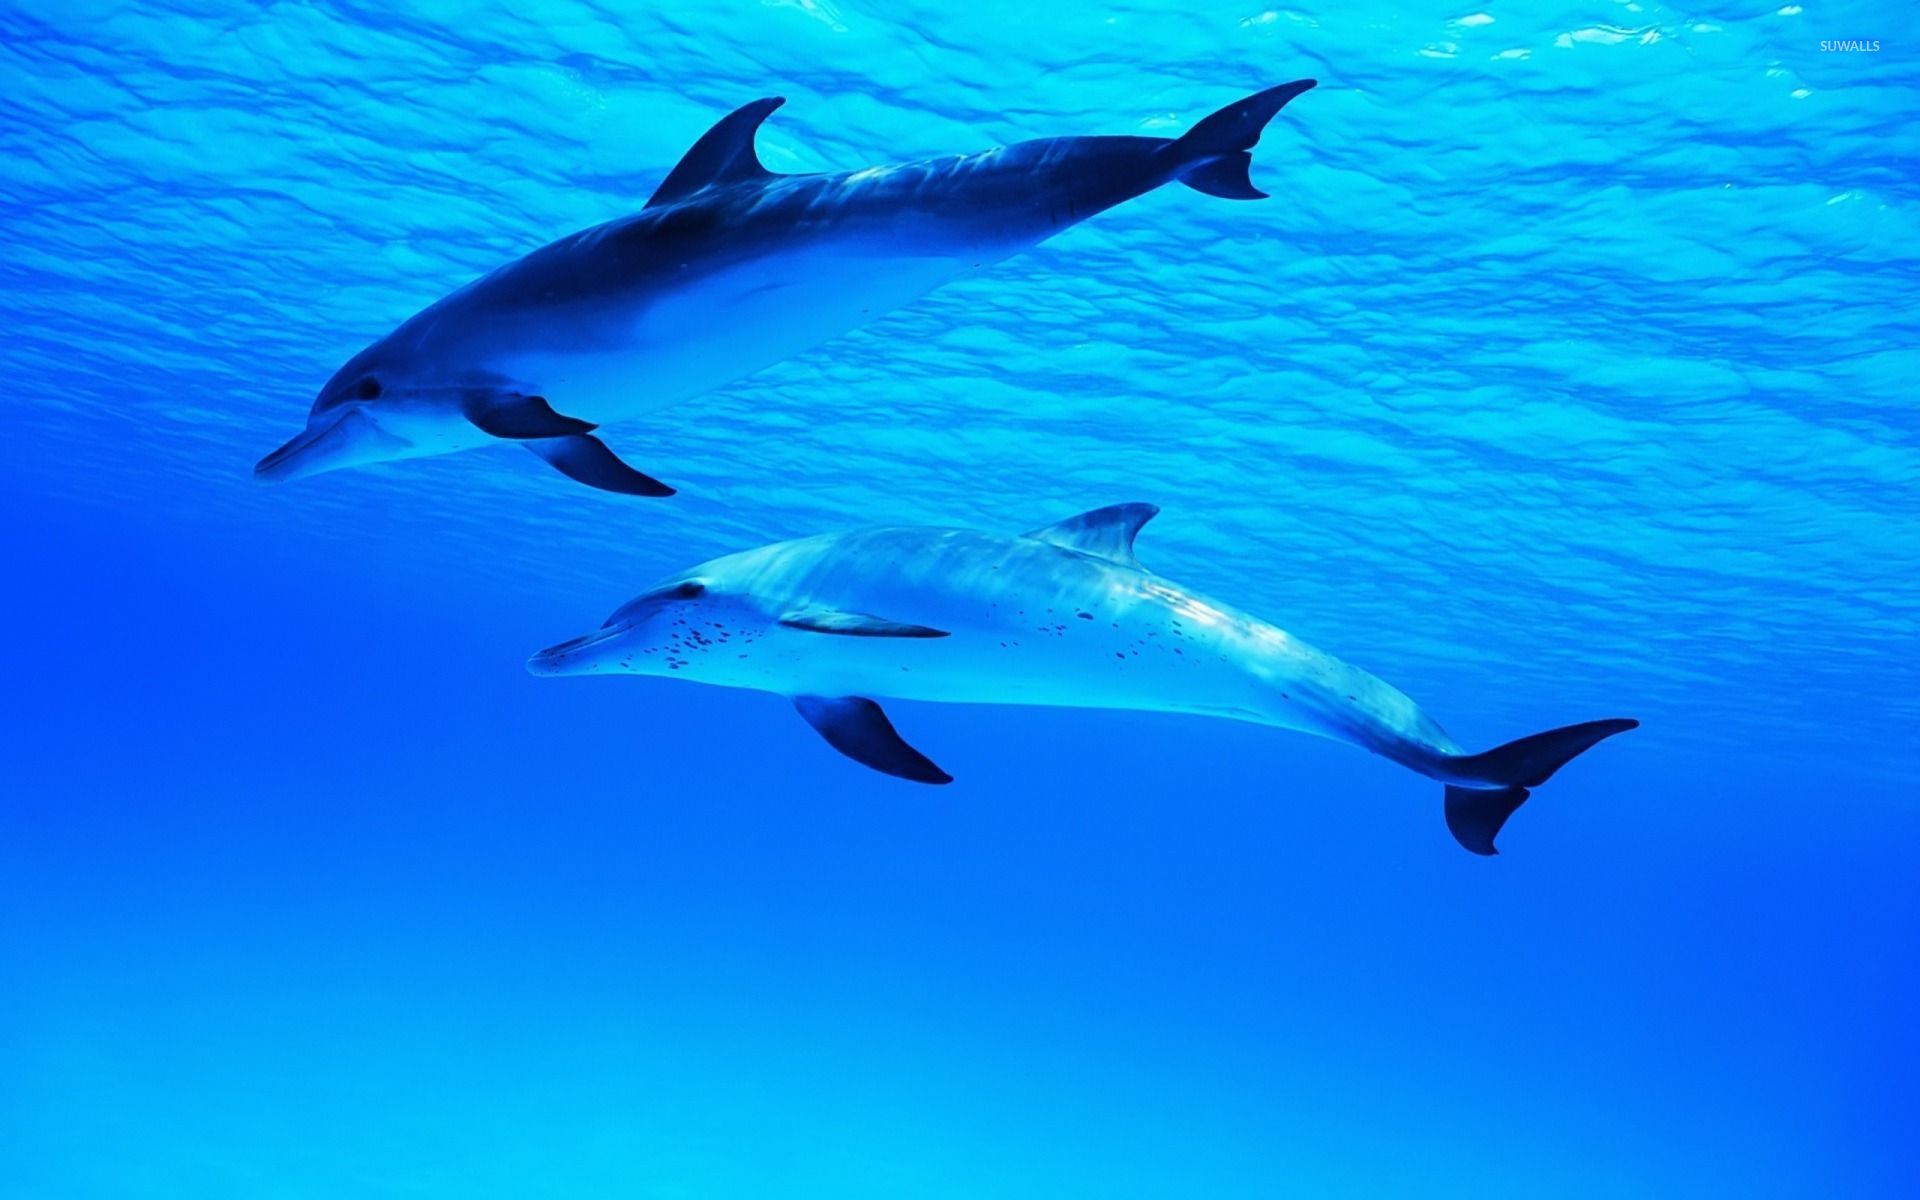 Dolphins under water wallpaper   Animal wallpapers   49218